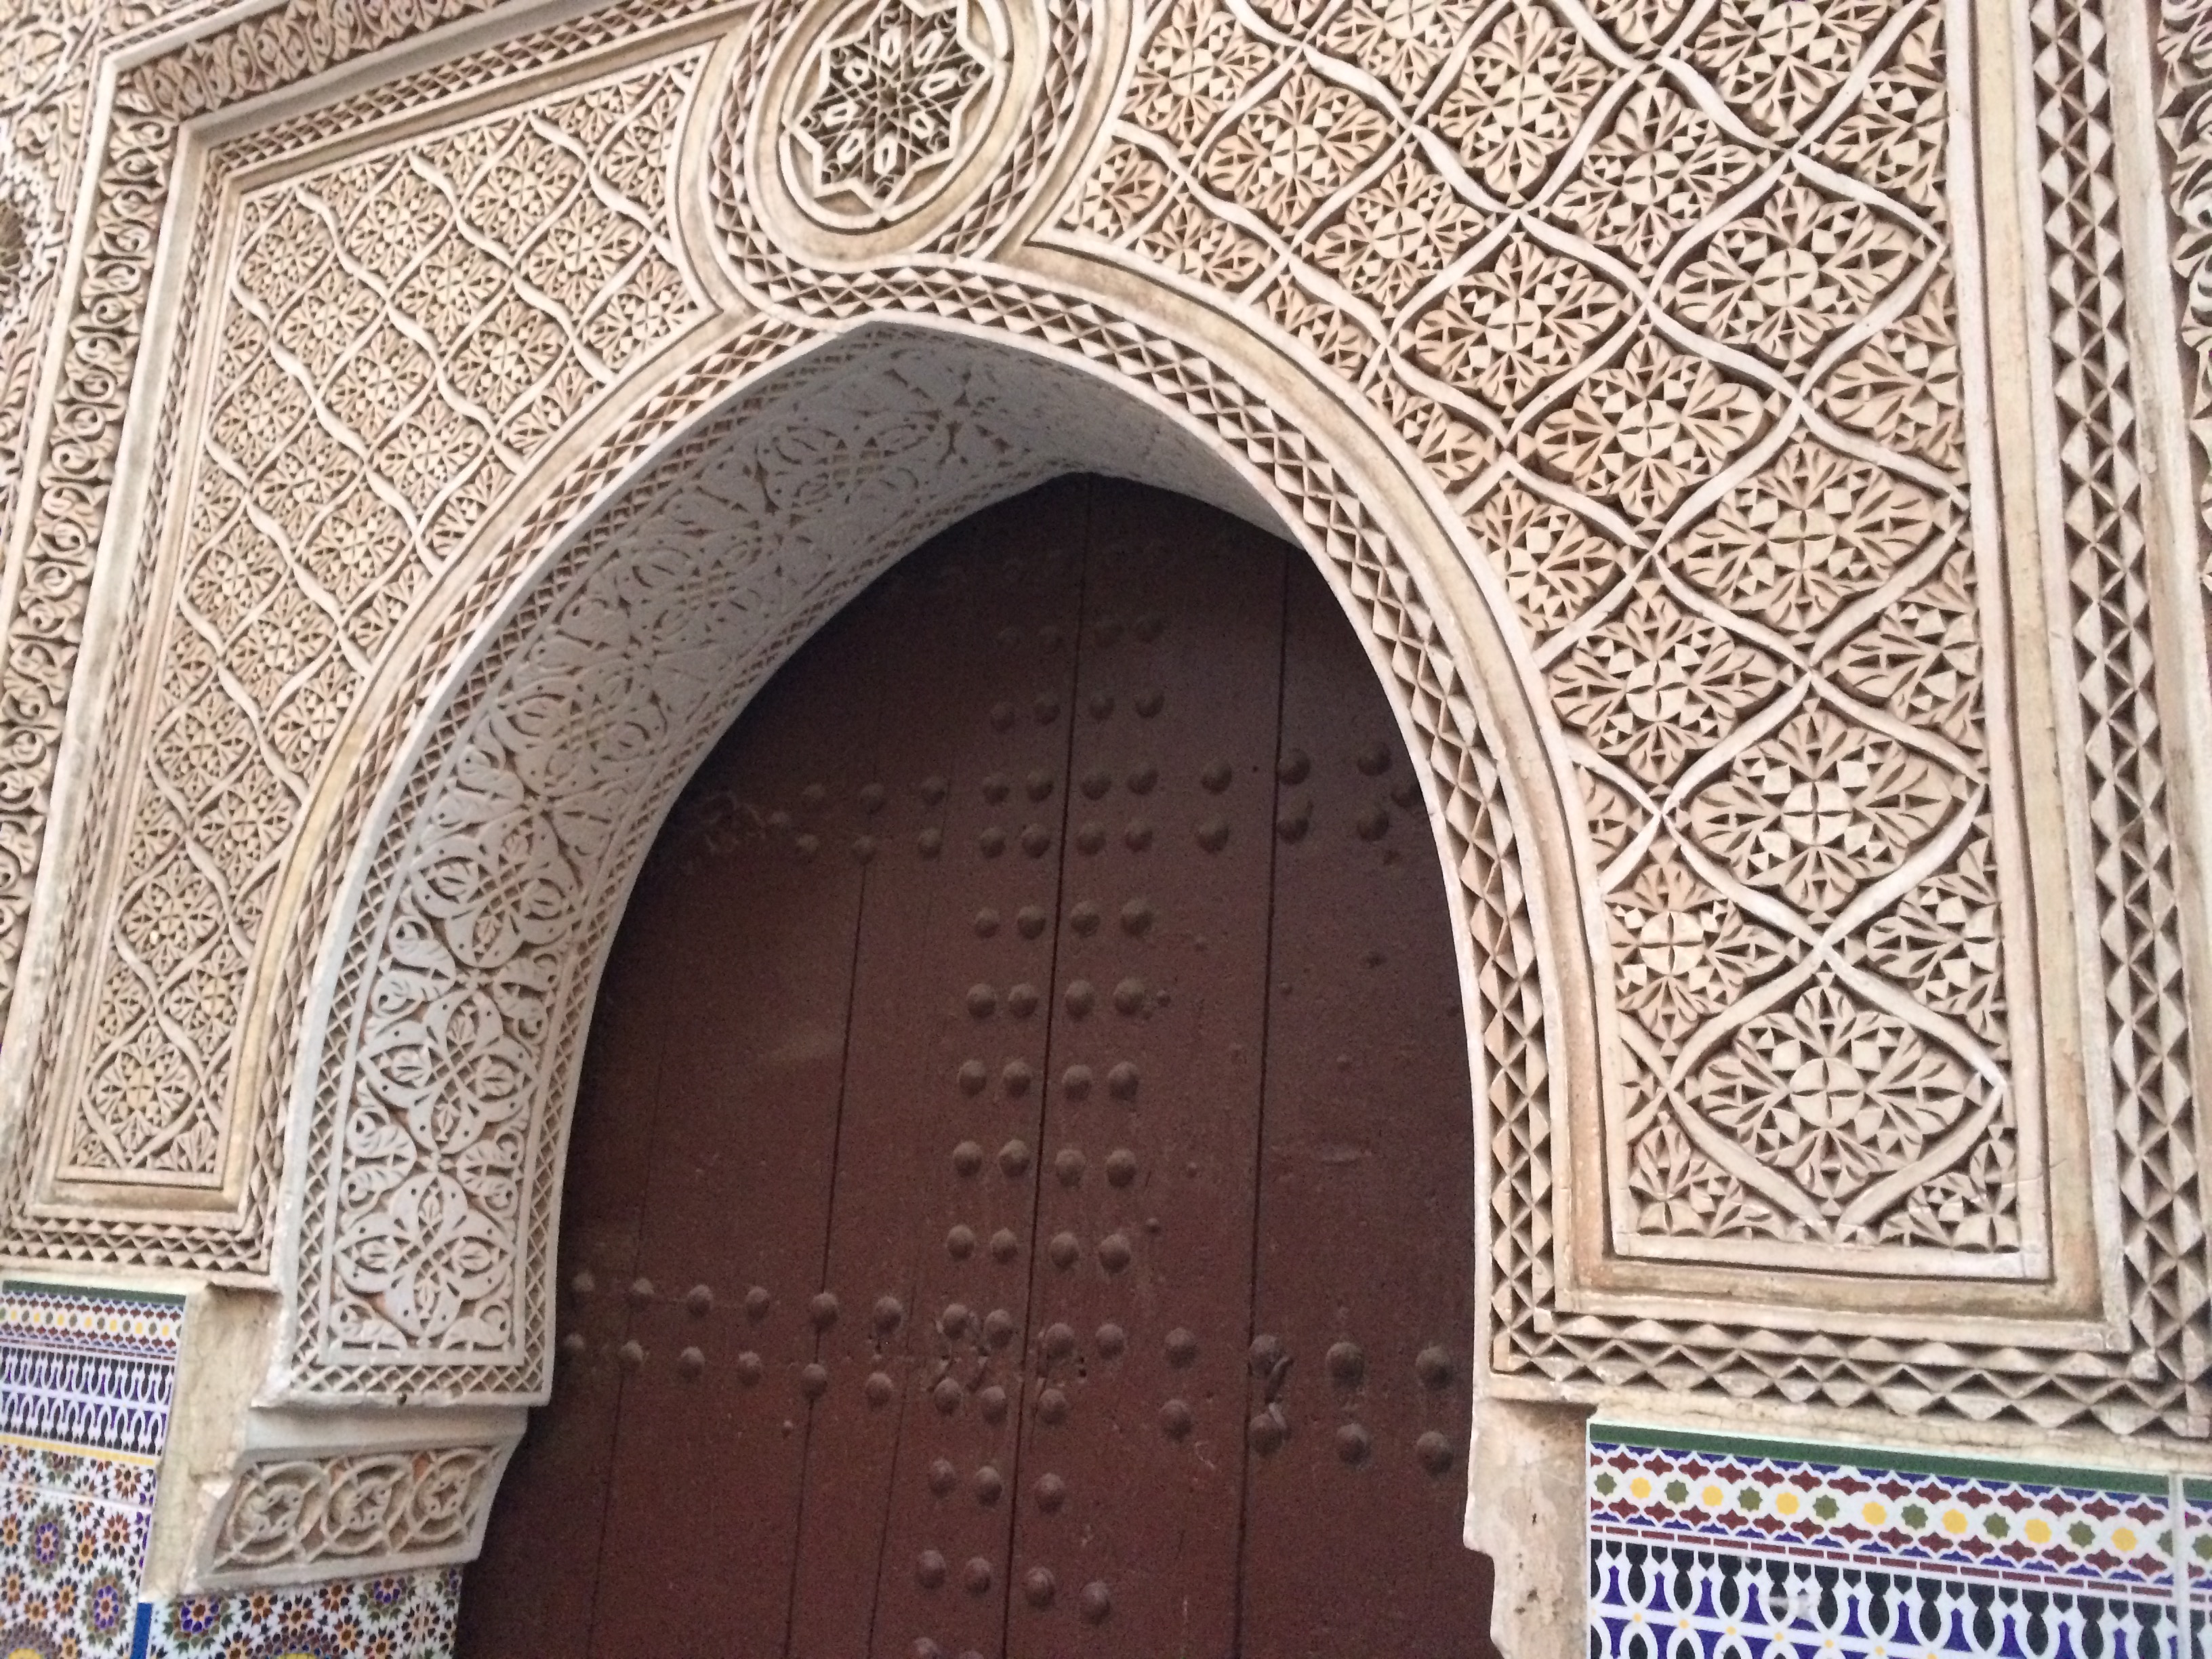 a ornate doorway with a tile design